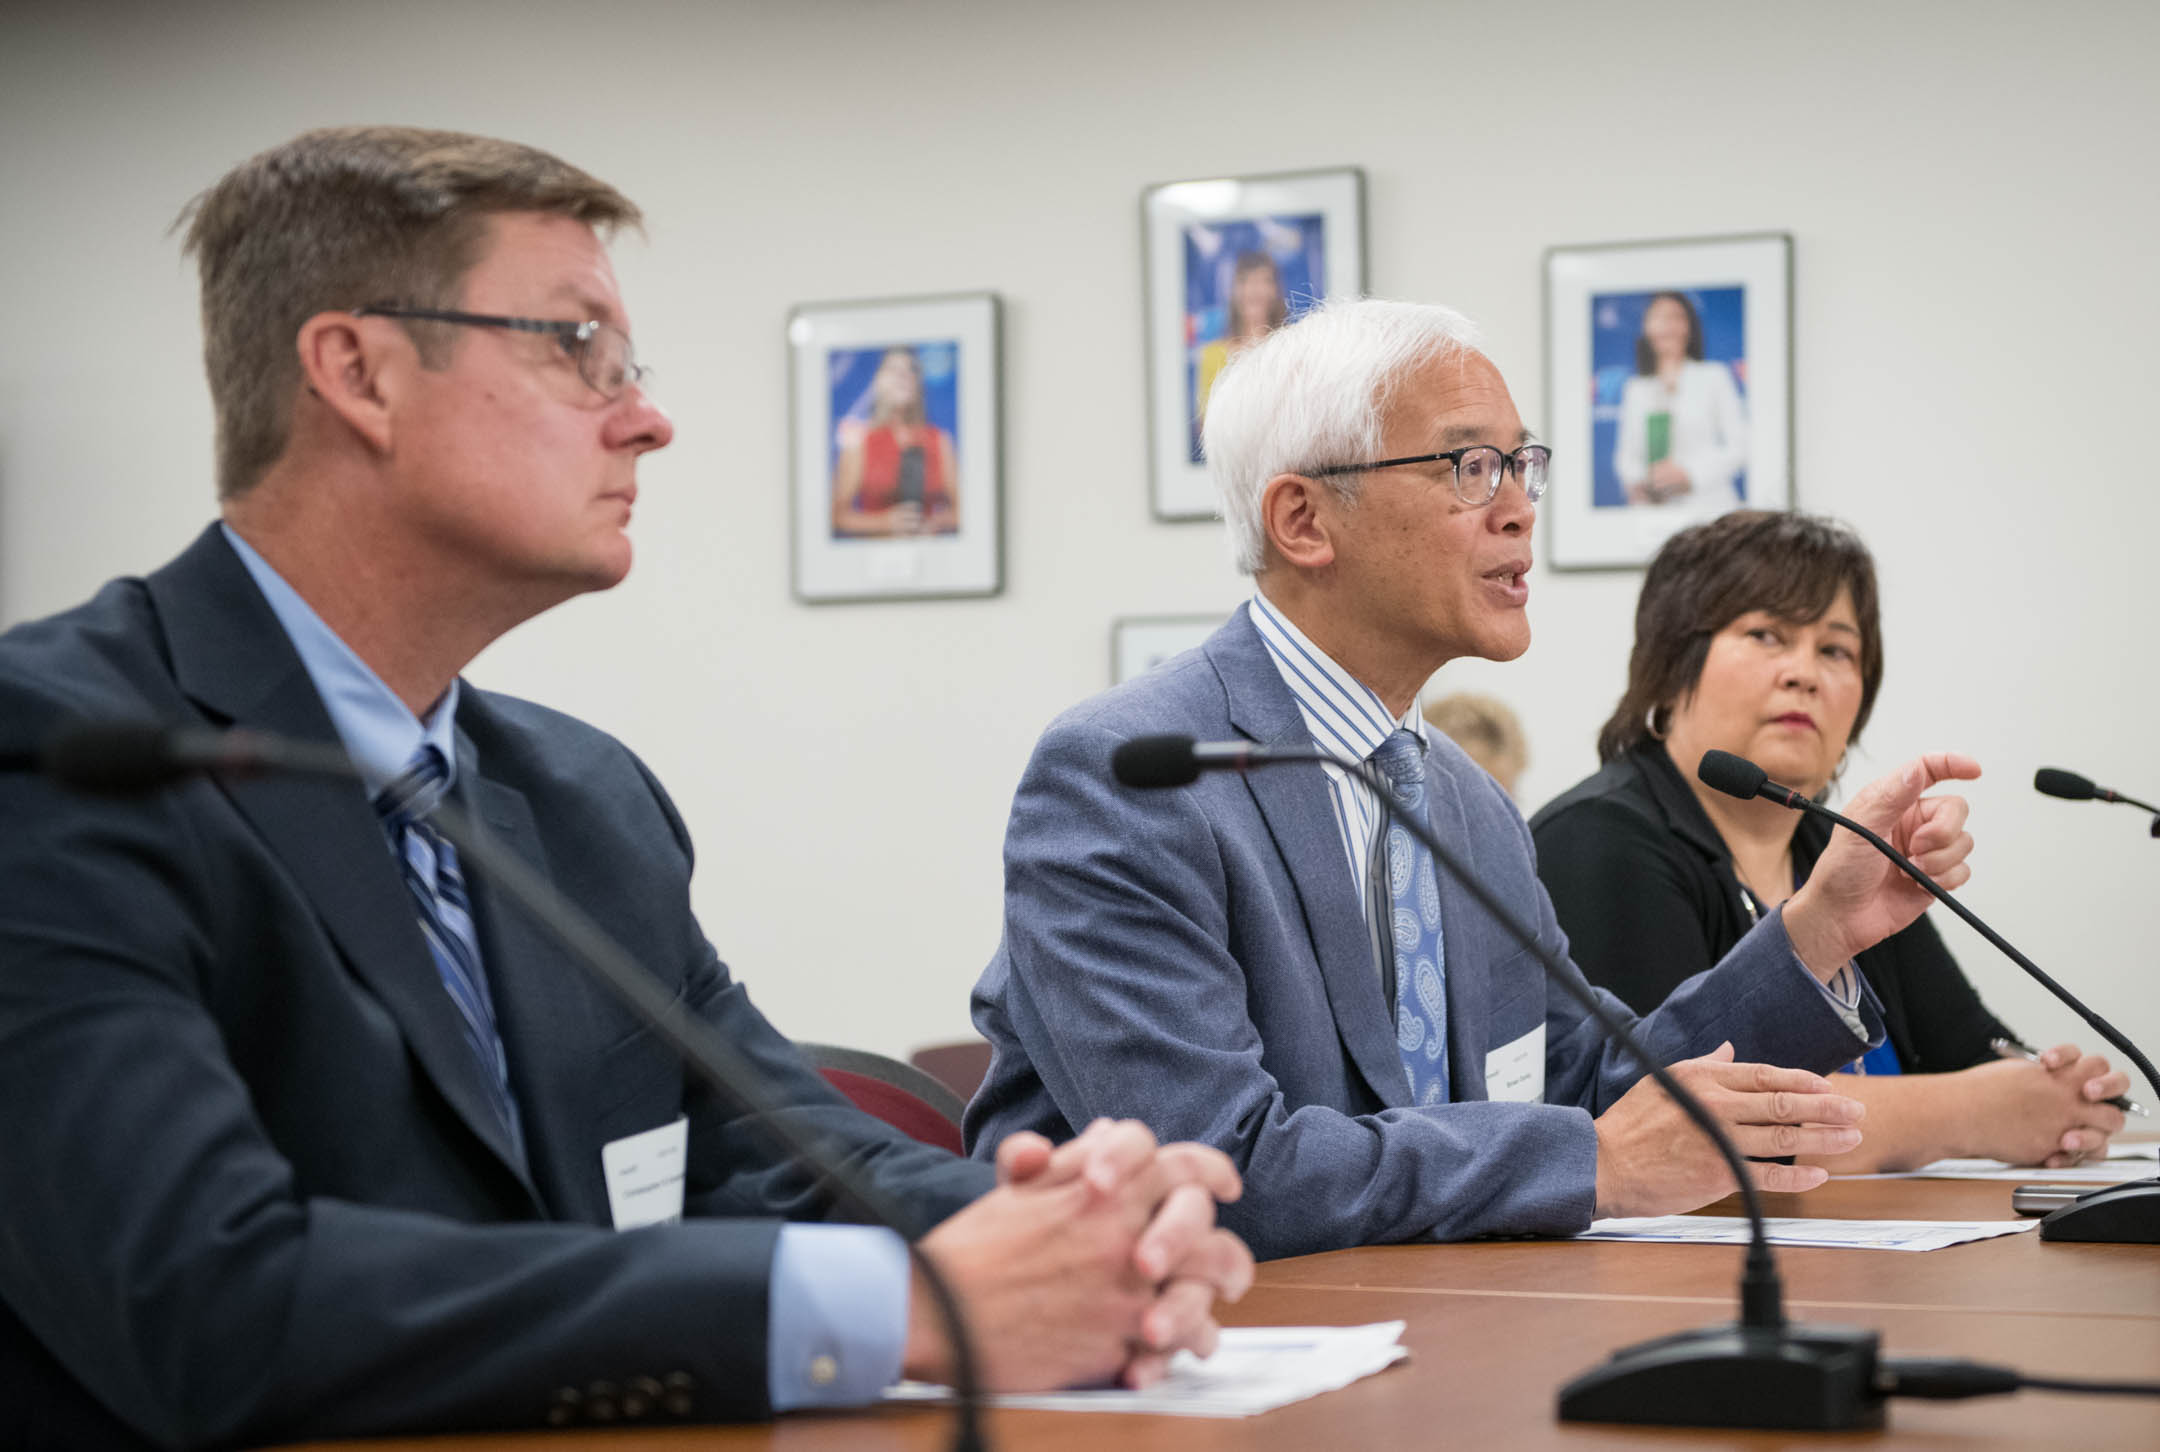 Center for Assessment Facilitator Brian Gong, center, presents with Center for Assessment Facilitator Chris Domaleski and Associate Commissioner Rhonda Sims over an update from the Accountability Performance Standard Setting Committee during a special meeting of the Kentucky Board of Education. Photo by Bobby Ellis, Sept. 5, 2018